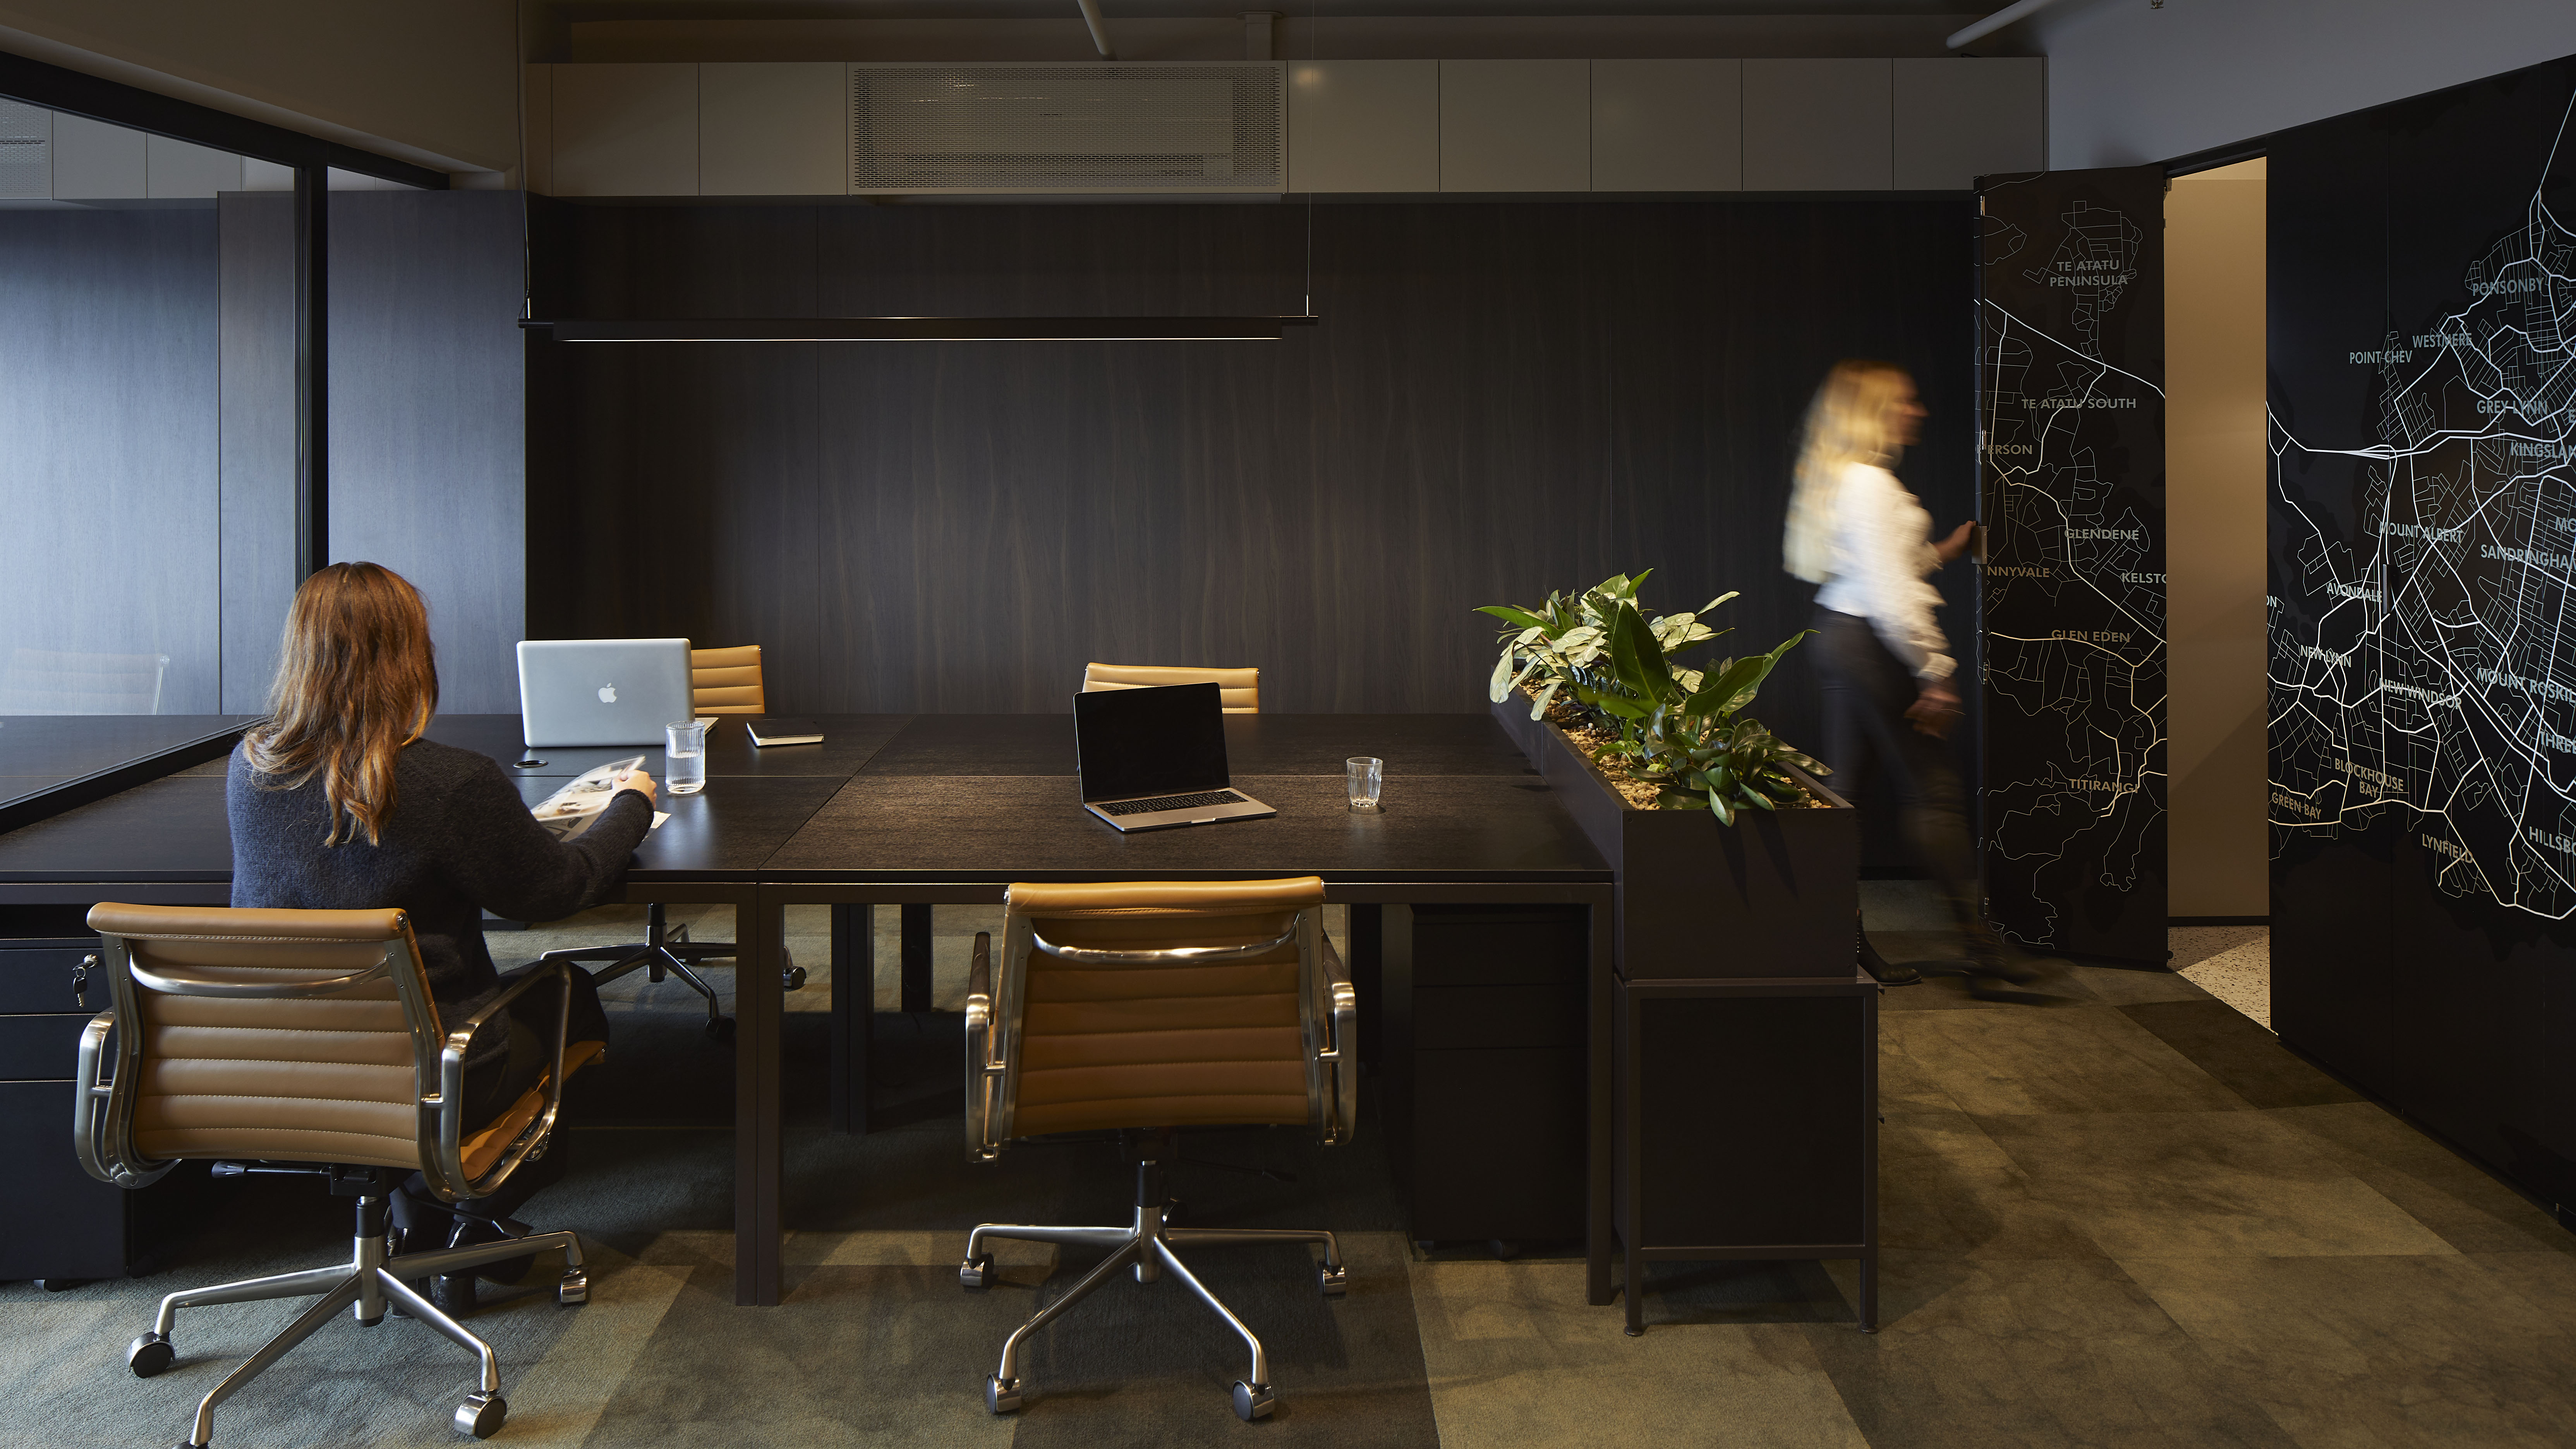 Office fitout completed by Miller Creative for Auckland company, Evans Randall Investors